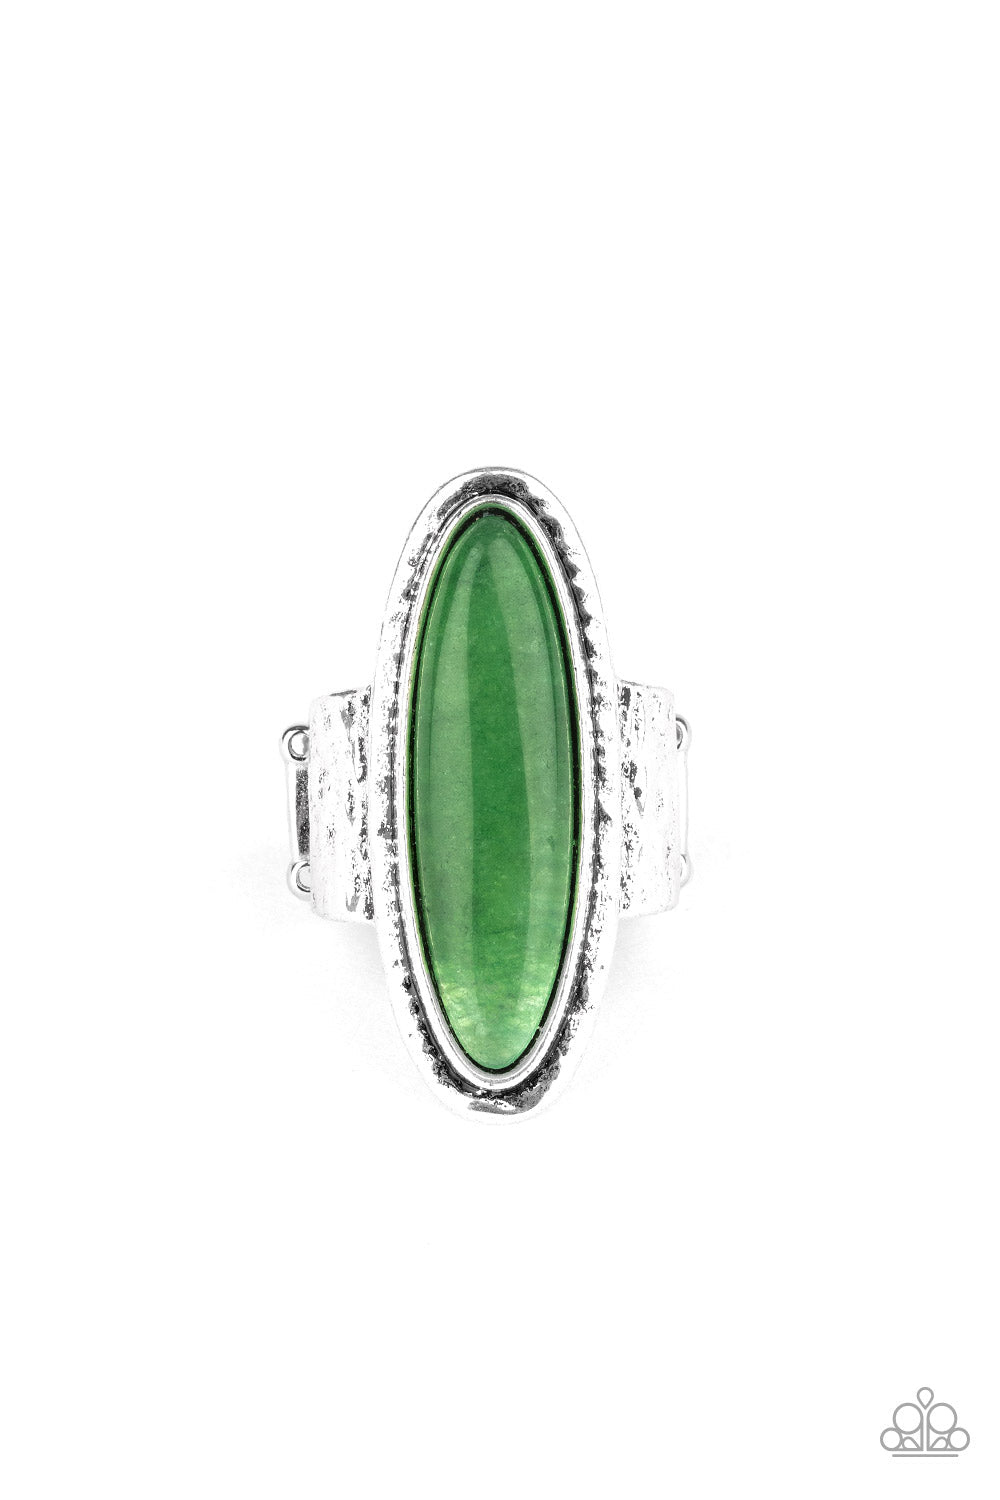 Stone Mystic - Green and Silver Ring - Paparazzi Accessories - An oblong green stone sits atop a hammered silver frame atop a hammered silver band, creating an earthy statement piece. Features a stretchy band for a flexible fit. Sold as one individual ring.  Bejeweled Accessories By Kristie - Trendy fashion jewelry for everyone -